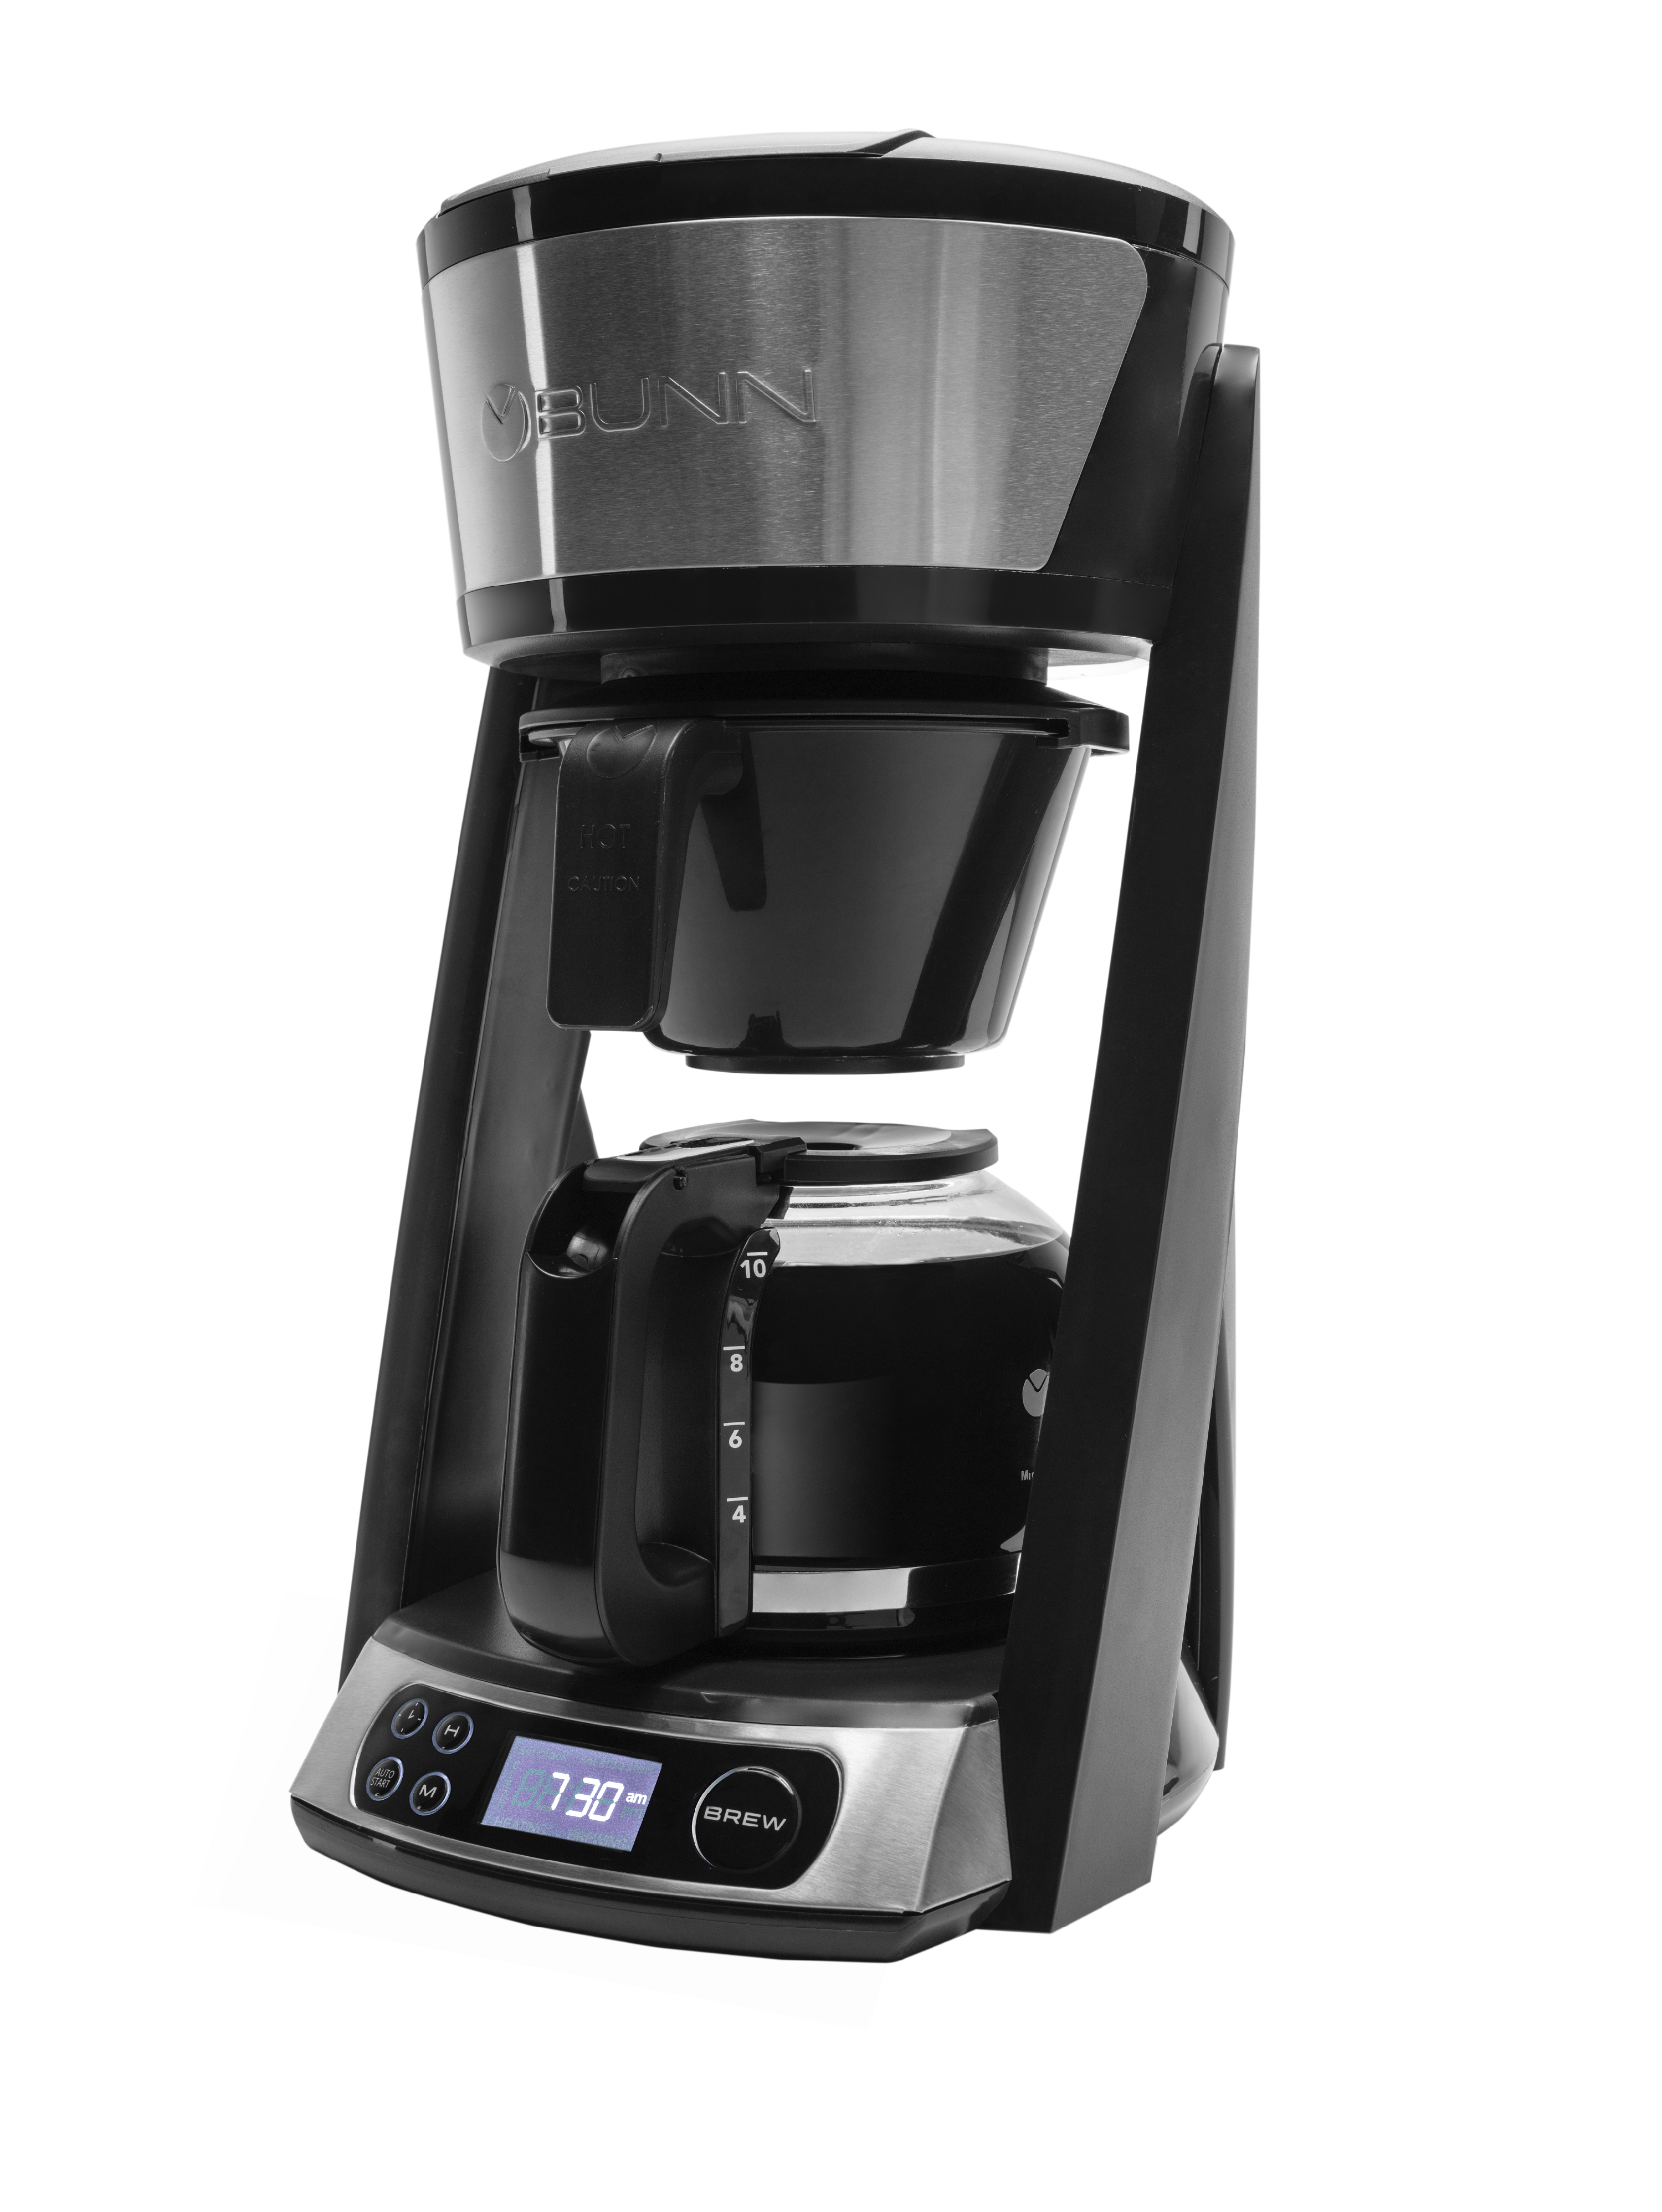 BUNN HB Stainless Steel 10 Cup Drip Coffee Maker (Condition: New) - image 4 of 5